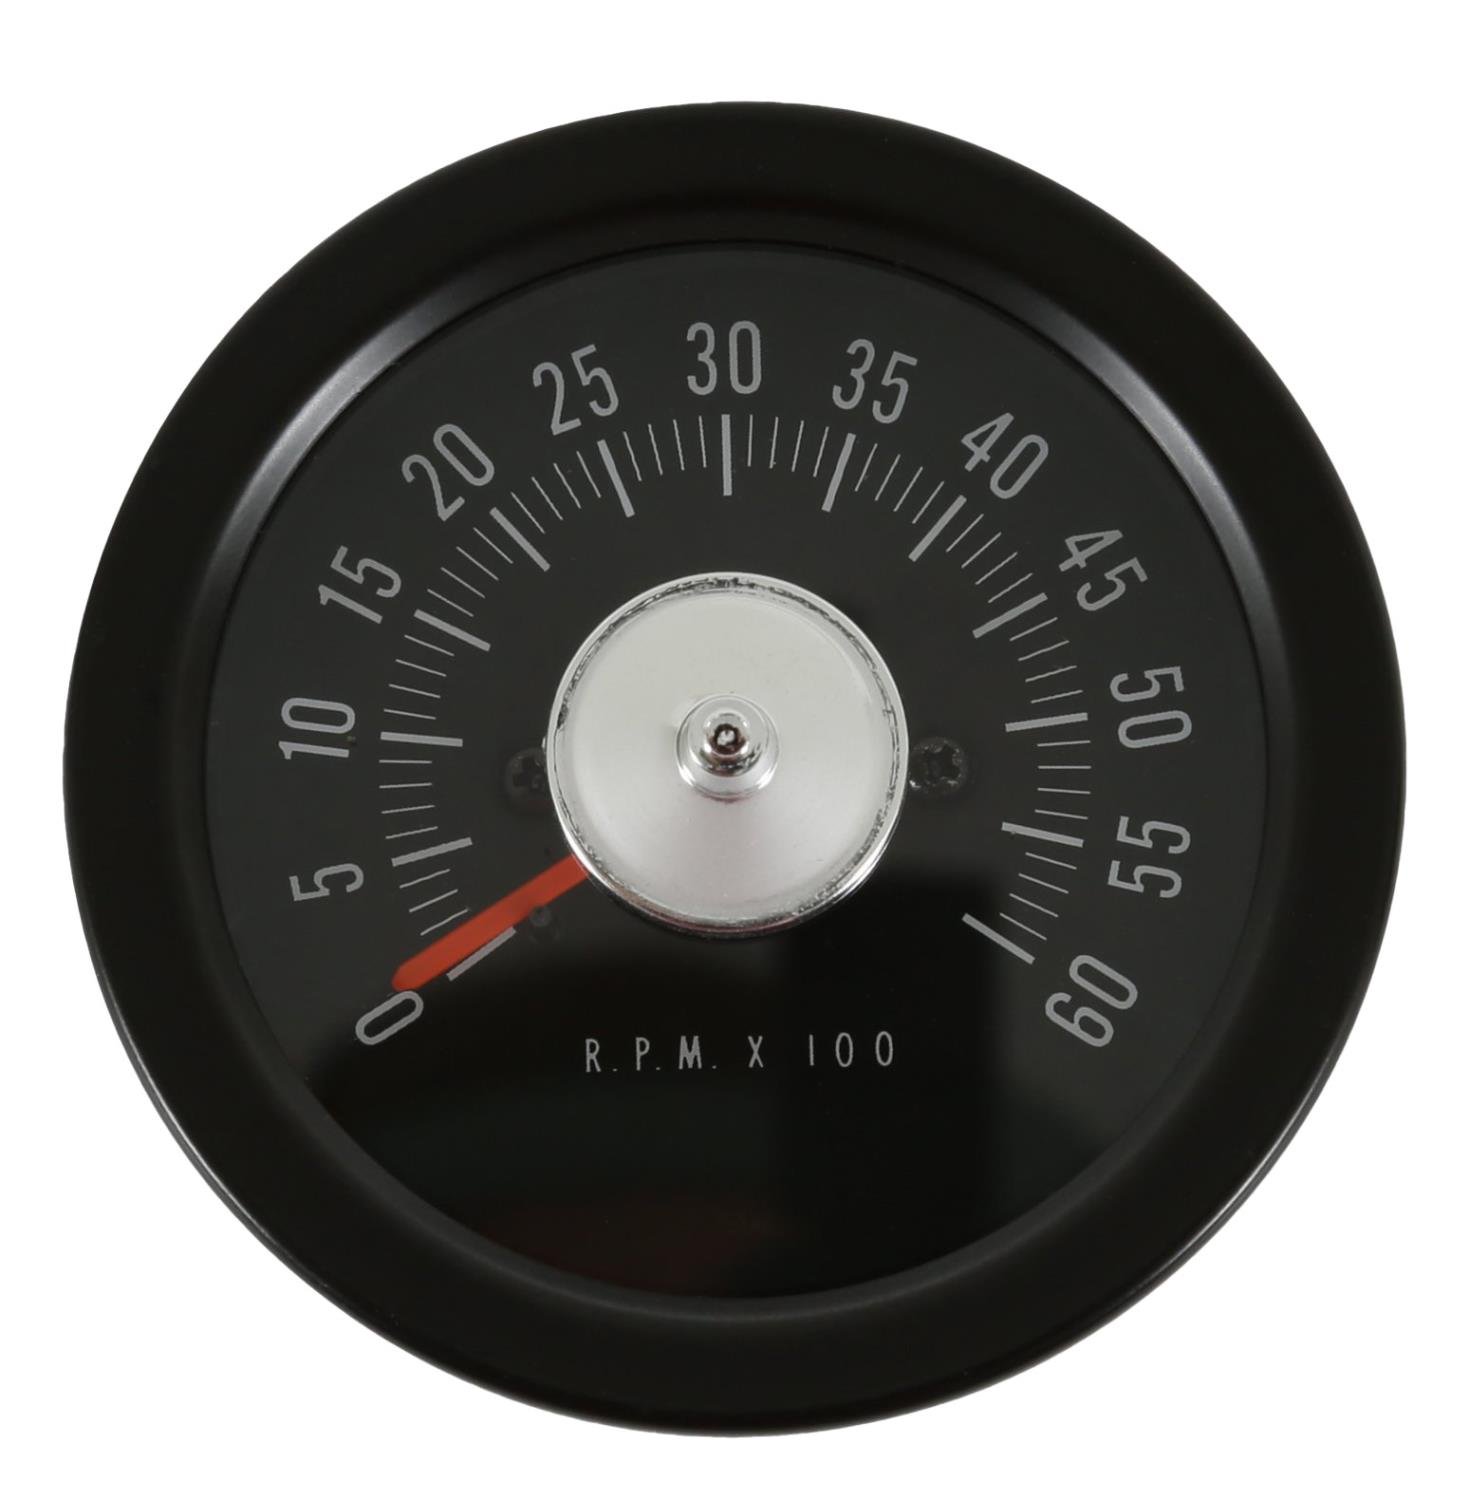 In-Dash Tachometer Conversion Kit for 1967-1968 Ford Mustang [6,000 RPM]